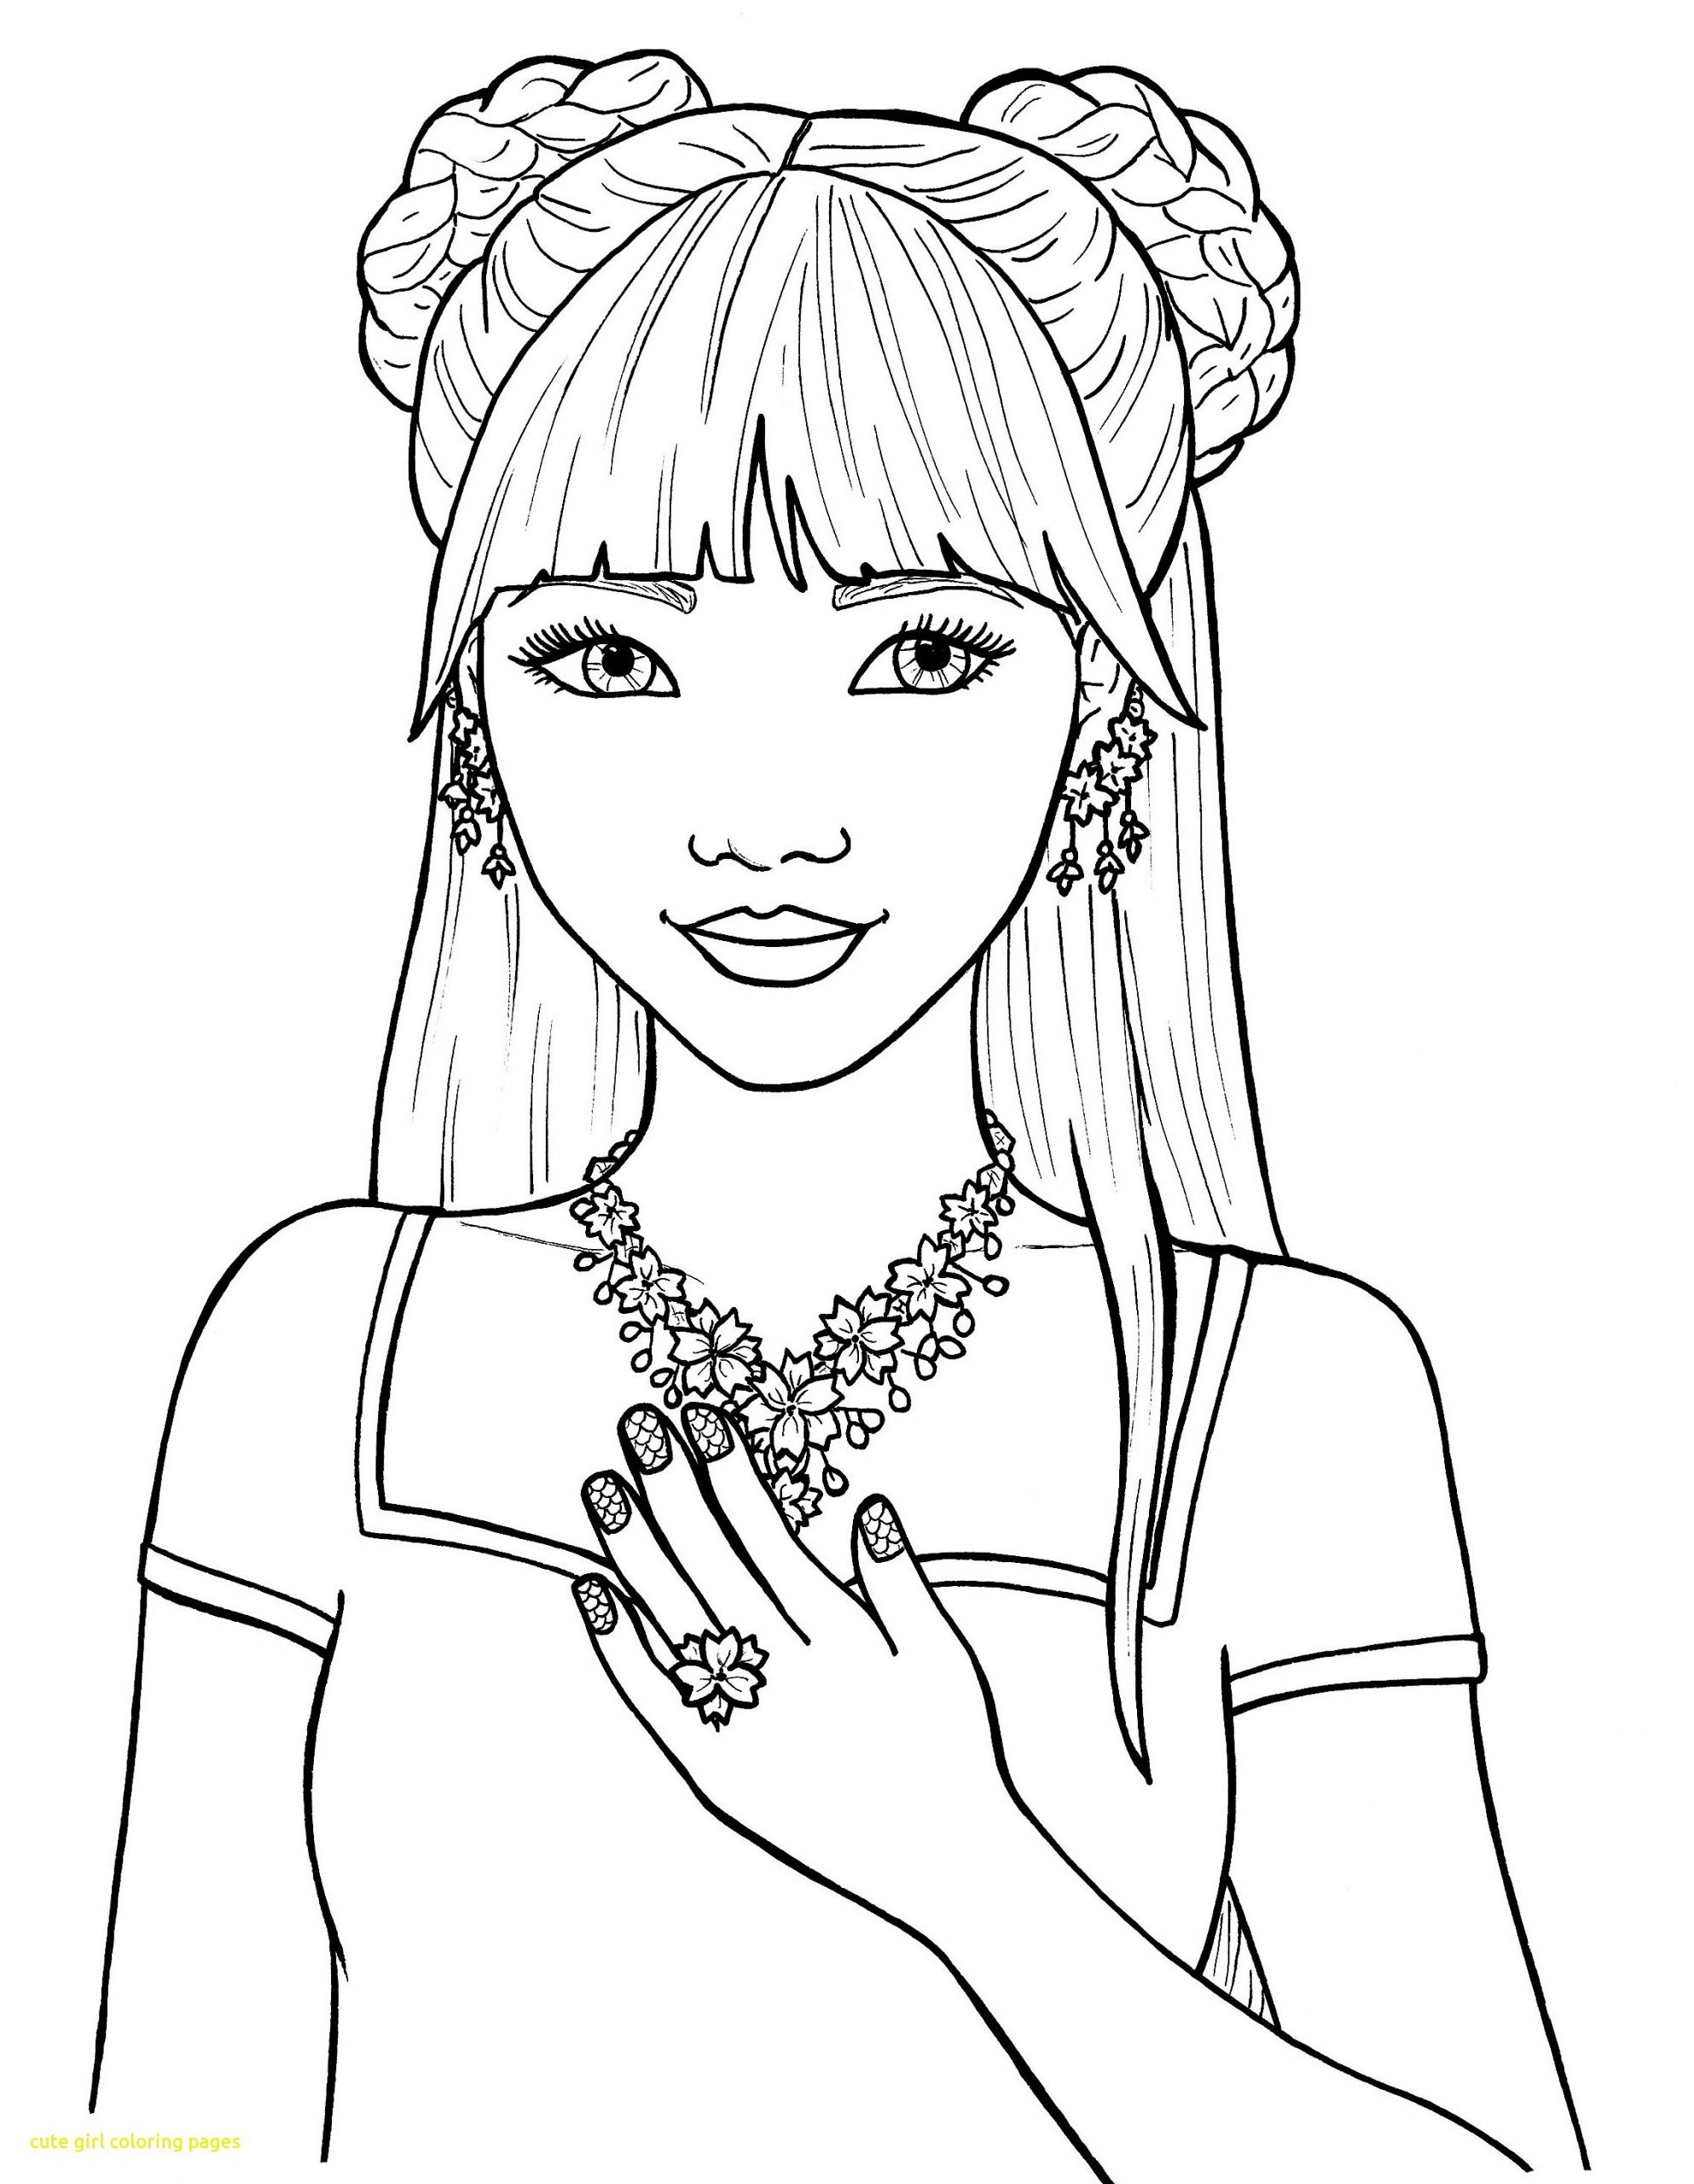 Coloring Sheets Of Girls
 Coloring Pages for Girls Best Coloring Pages For Kids